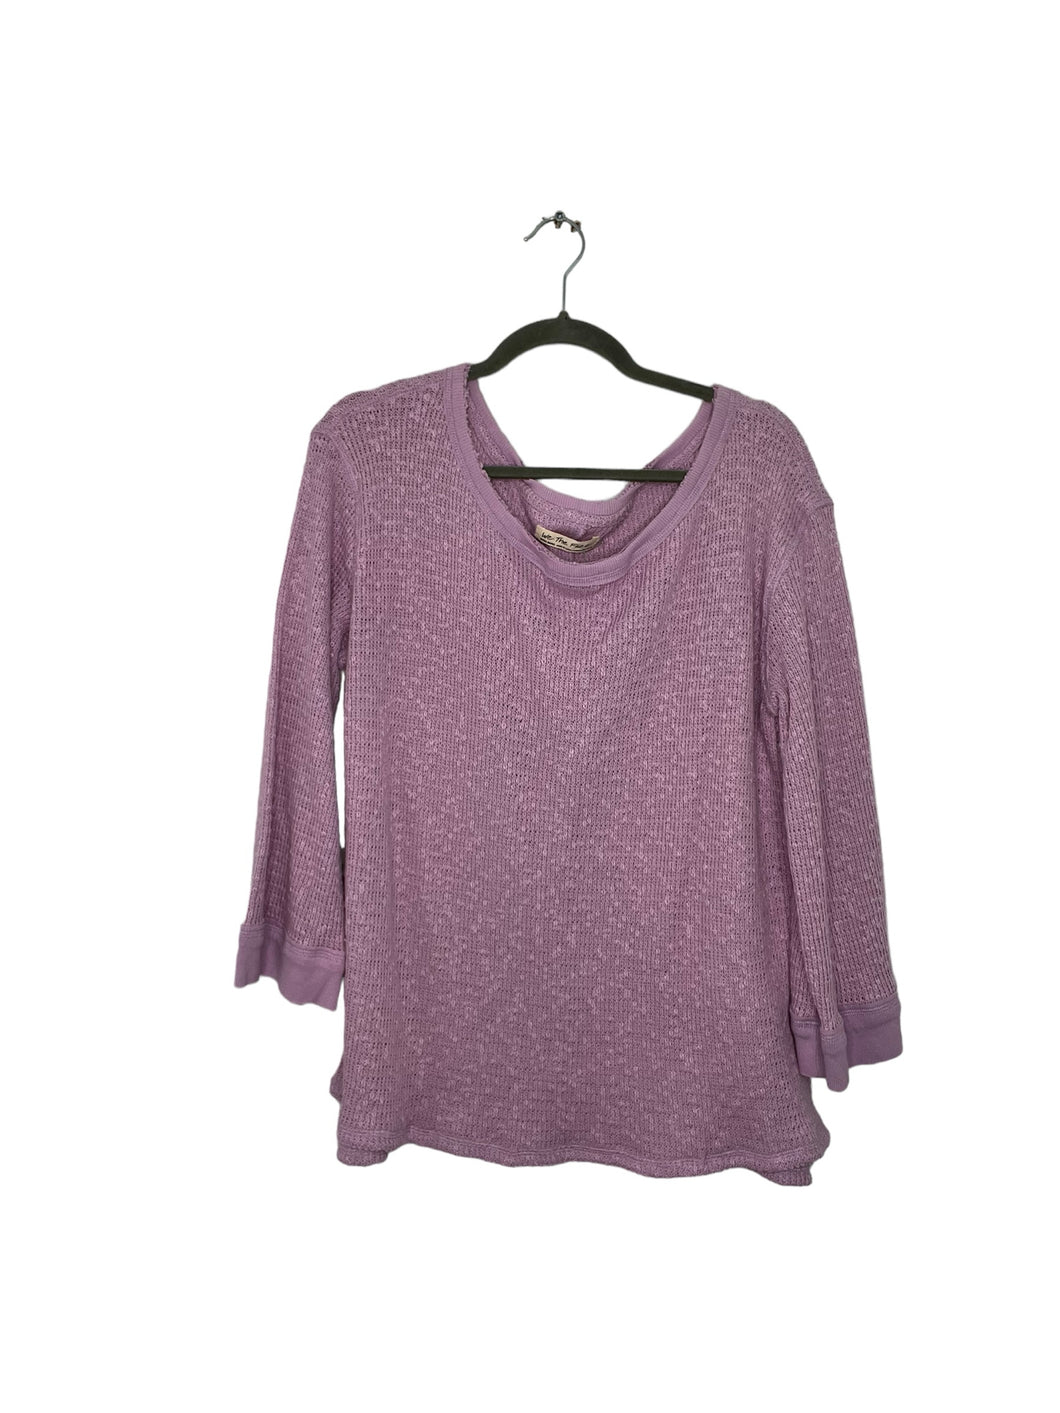 Free People Size X- Small Lavender Top- Ladies